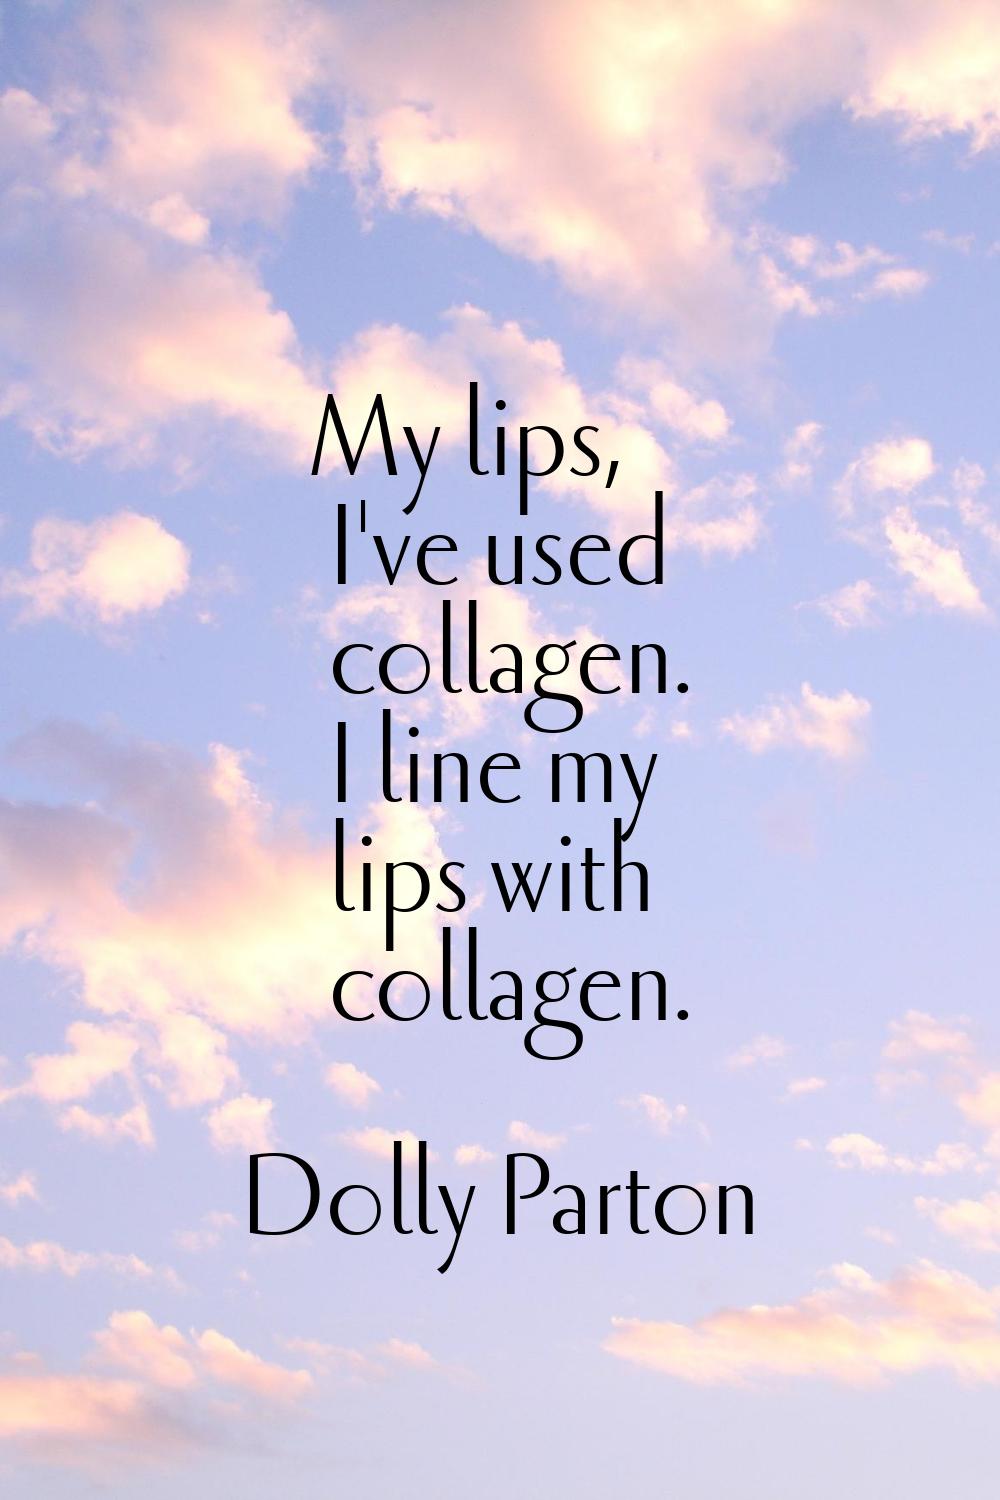 My lips, I've used collagen. I line my lips with collagen.